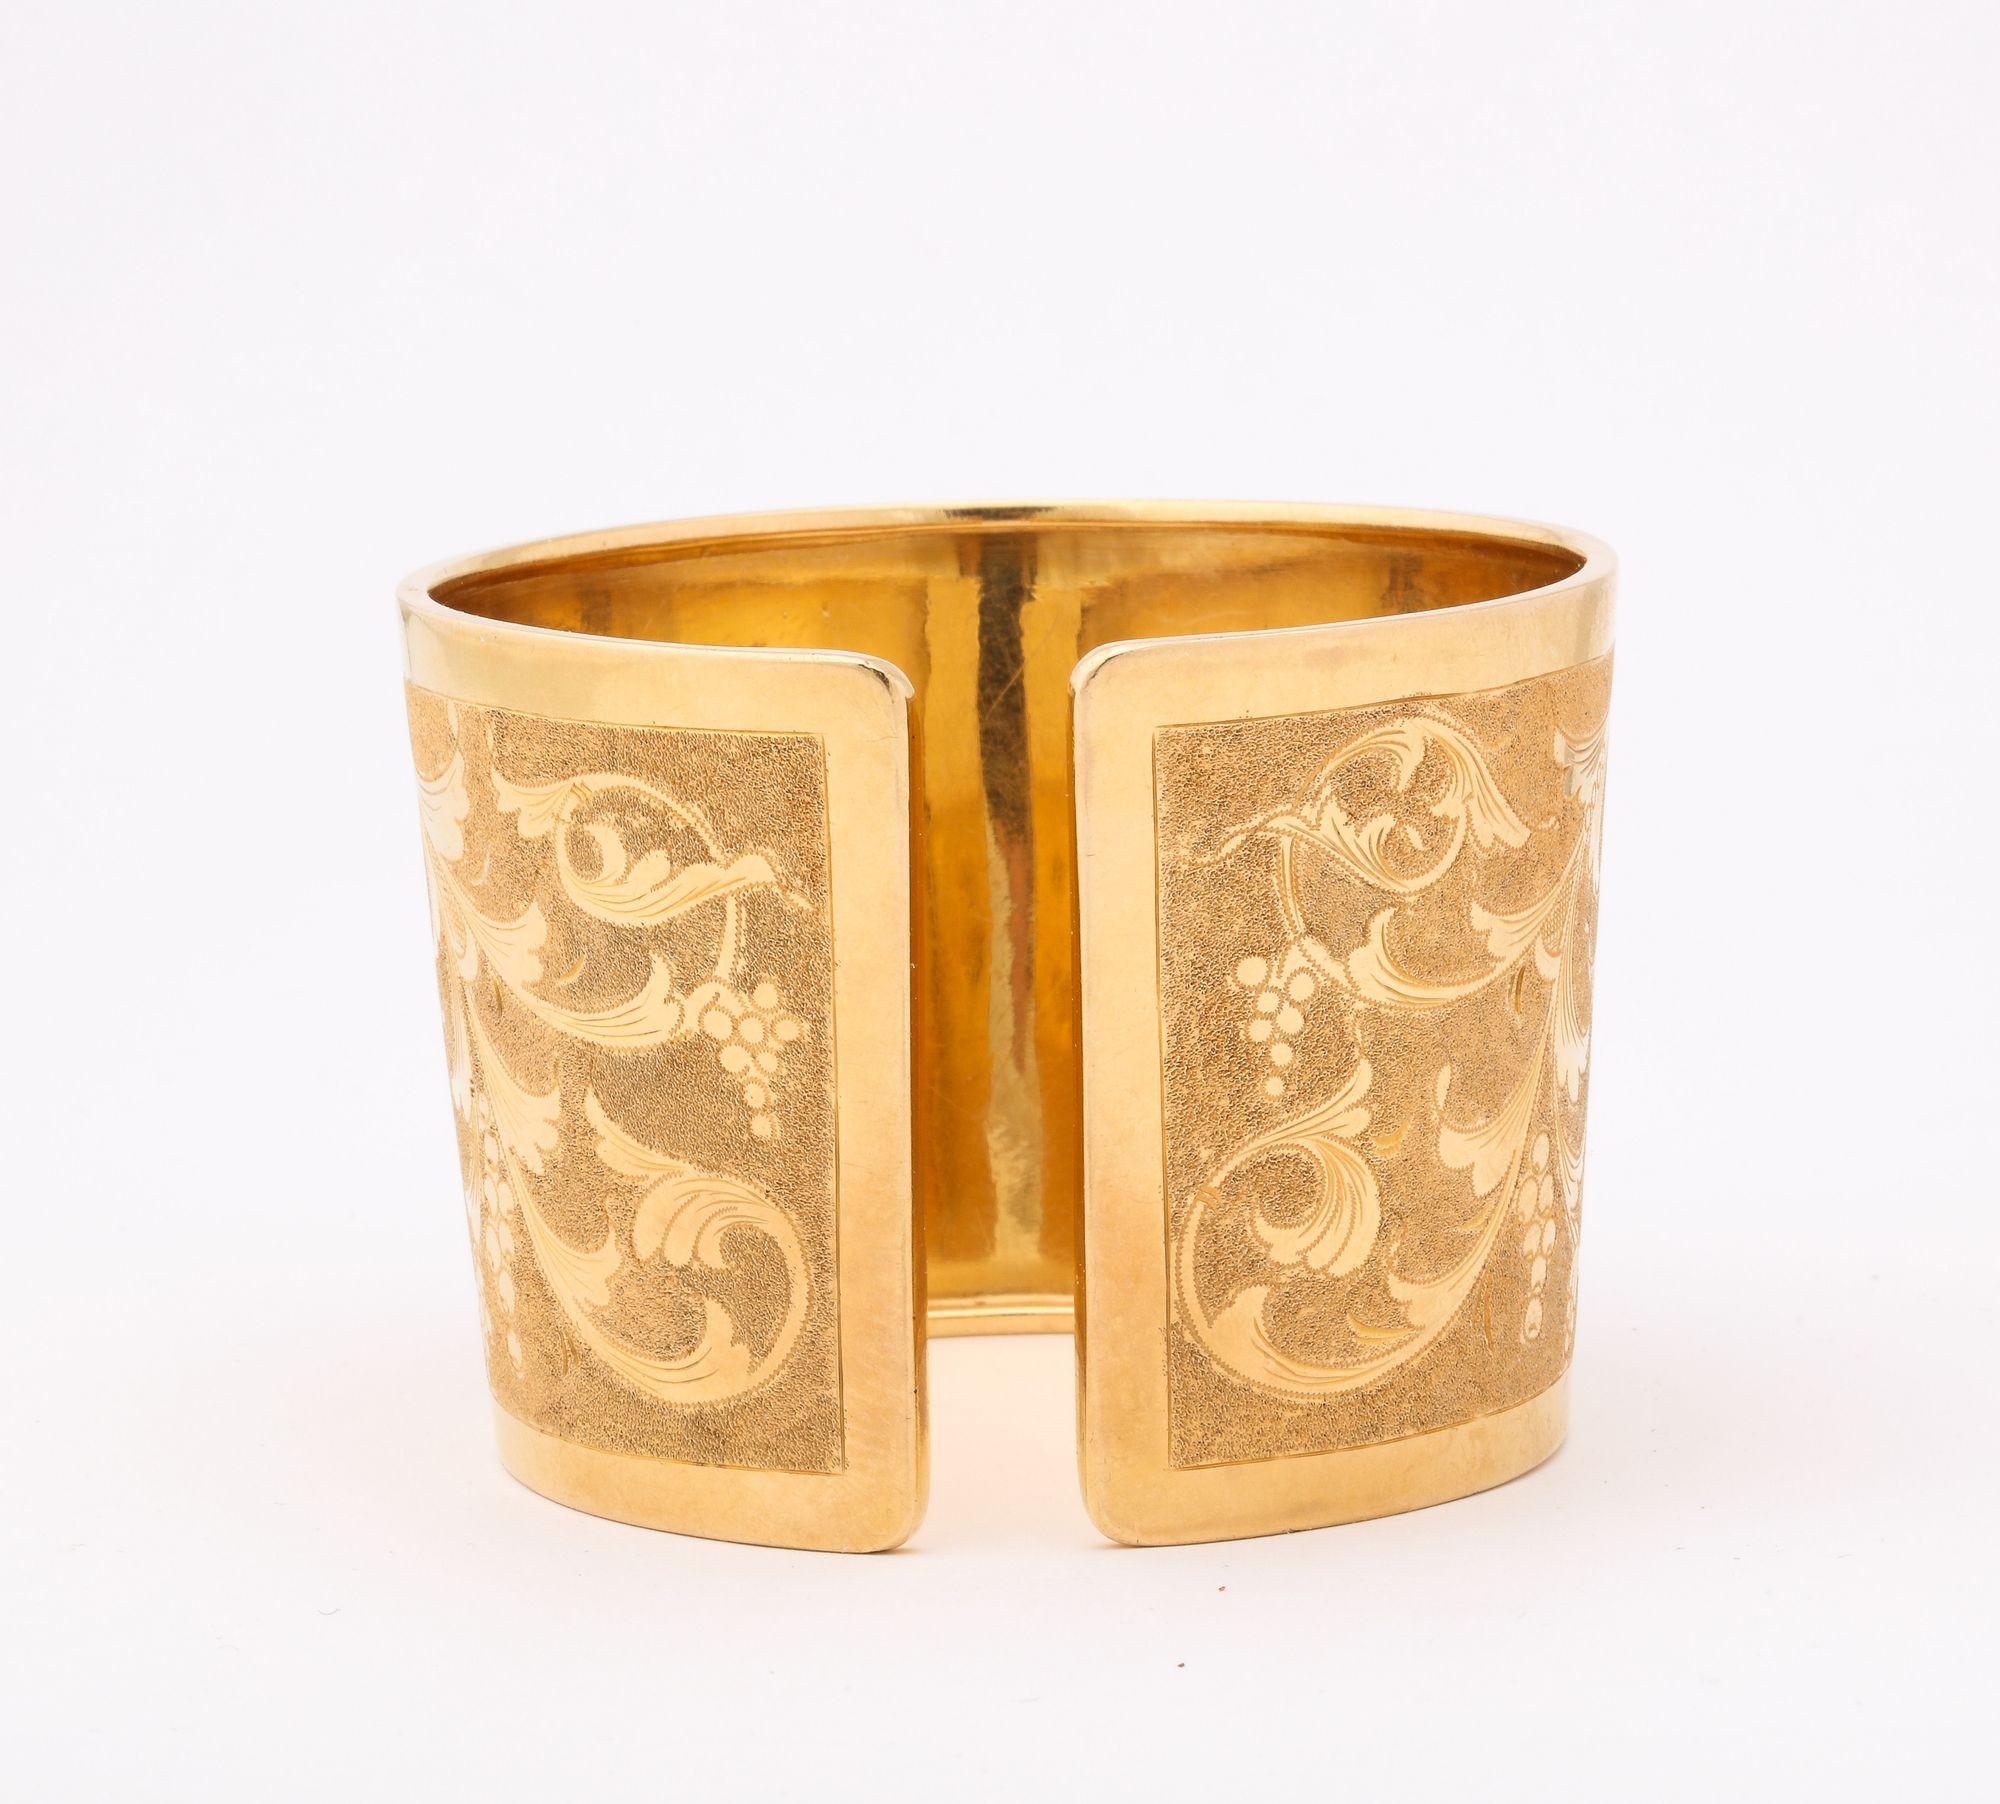 Italian Classical  Engraved Cuff With Two Tone Gold For Sale 4